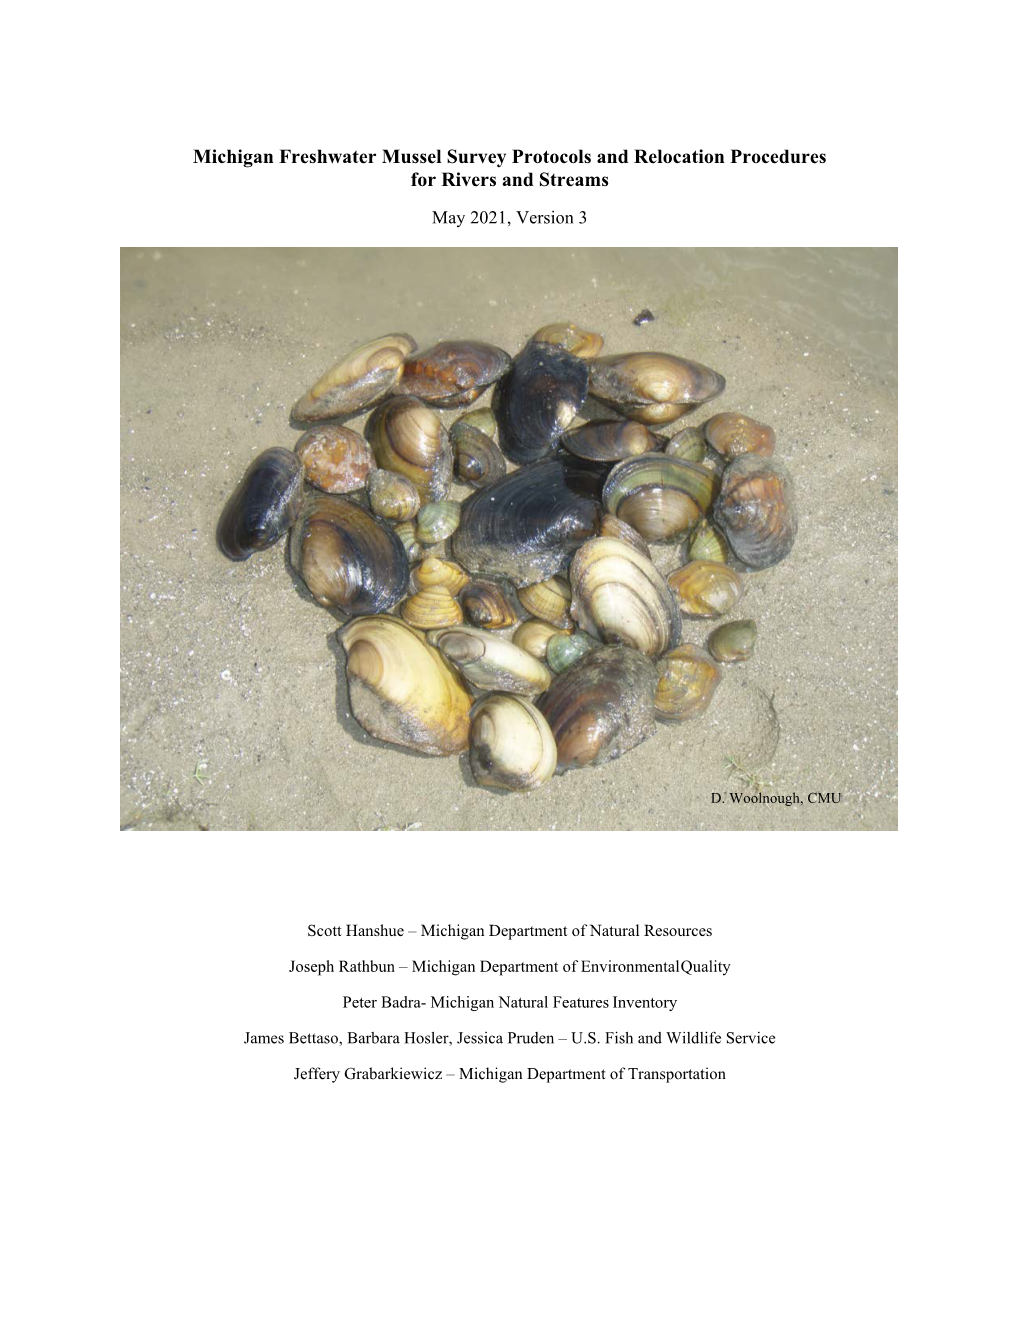 Michigan Freshwater Mussel Survey Protocols and Relocation Procedures for Rivers and Streams May 2021, Version 3